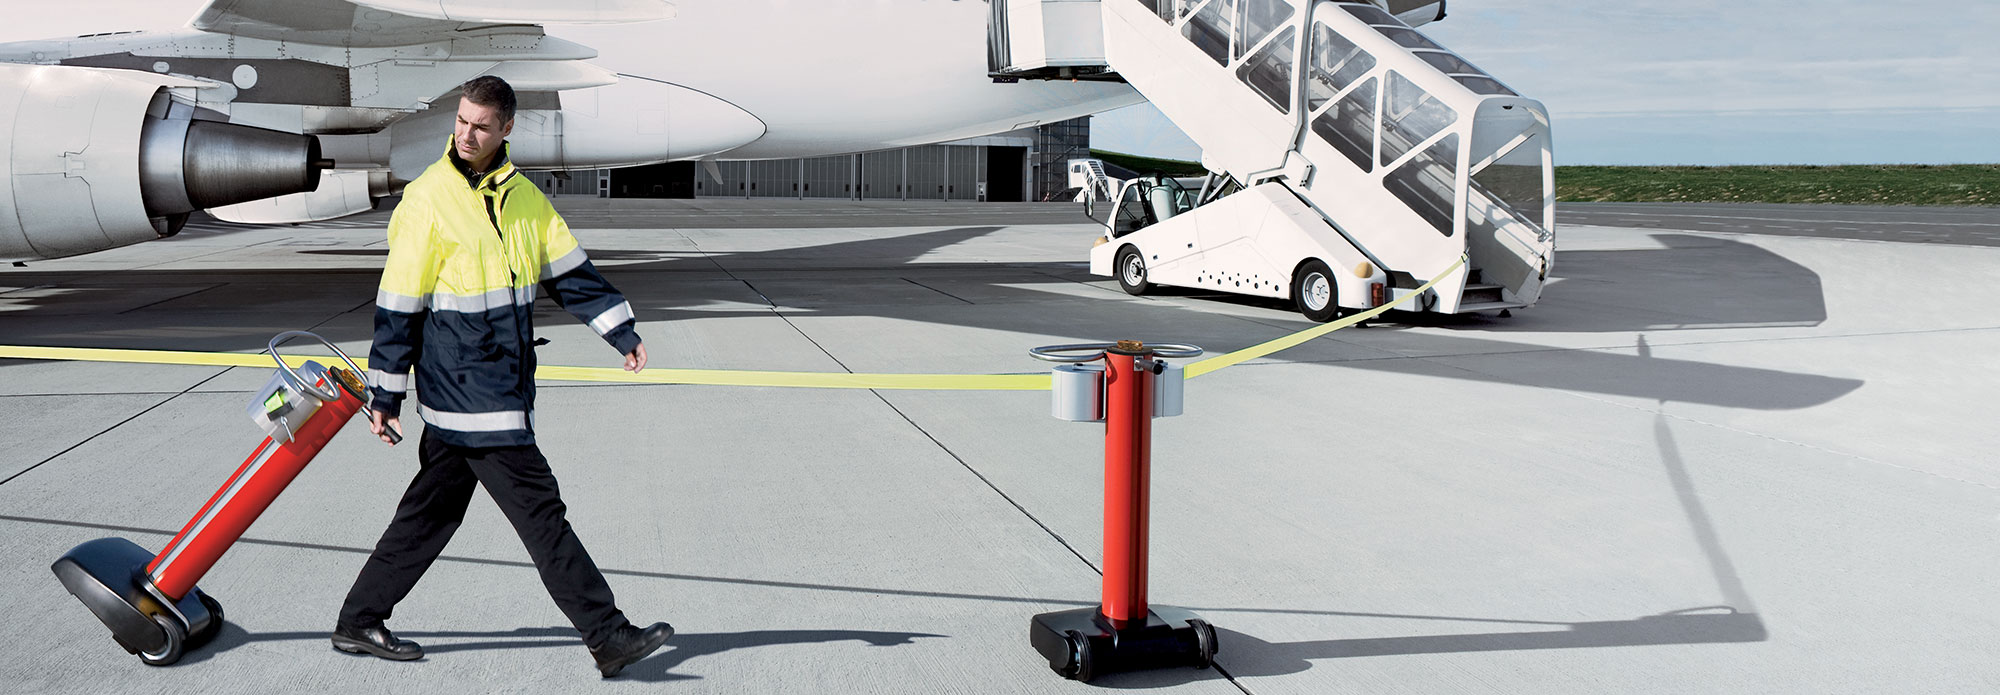 JetTrac Portable Safety Barrier